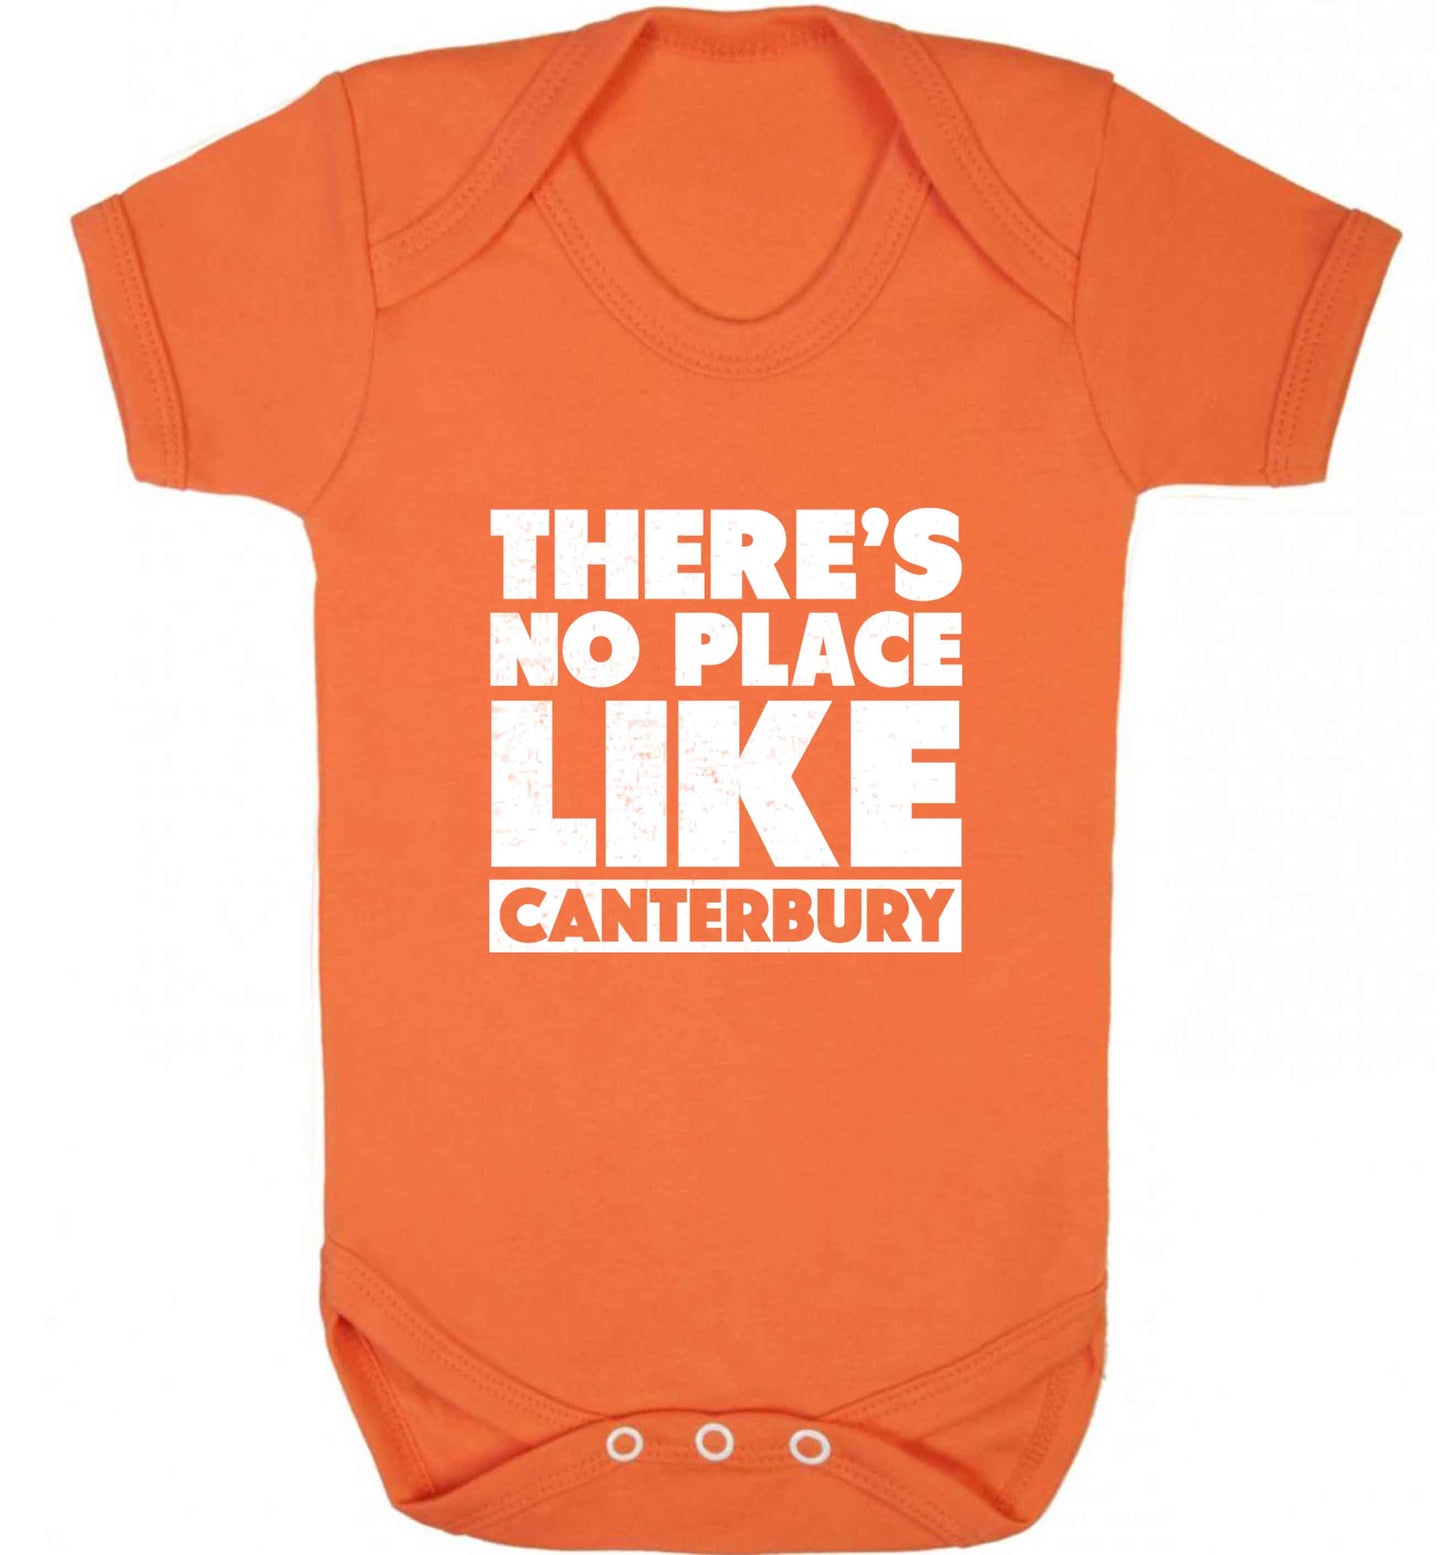 There's no place like Canterbury baby vest orange 18-24 months